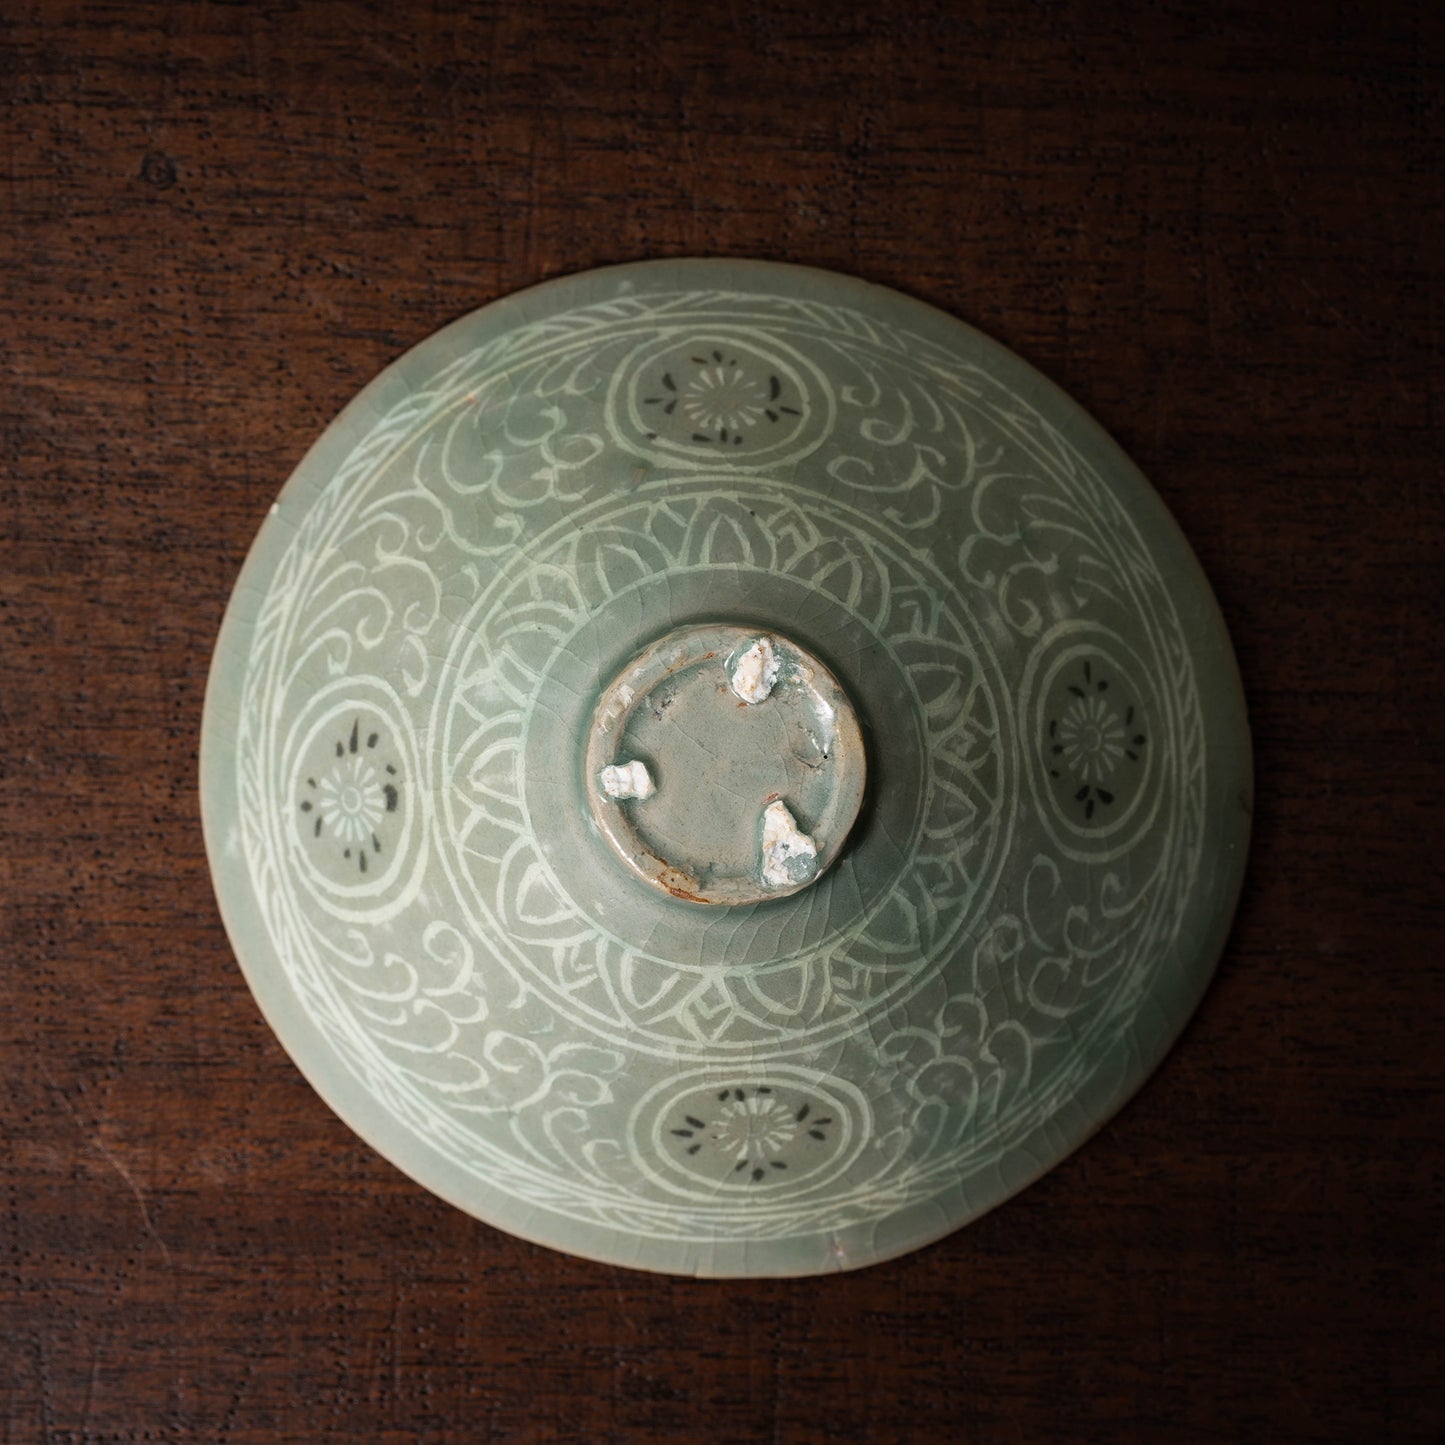 Goryeo Dynasty Celadon Tea Bowl with Inlaid Cloud and Dragon Design